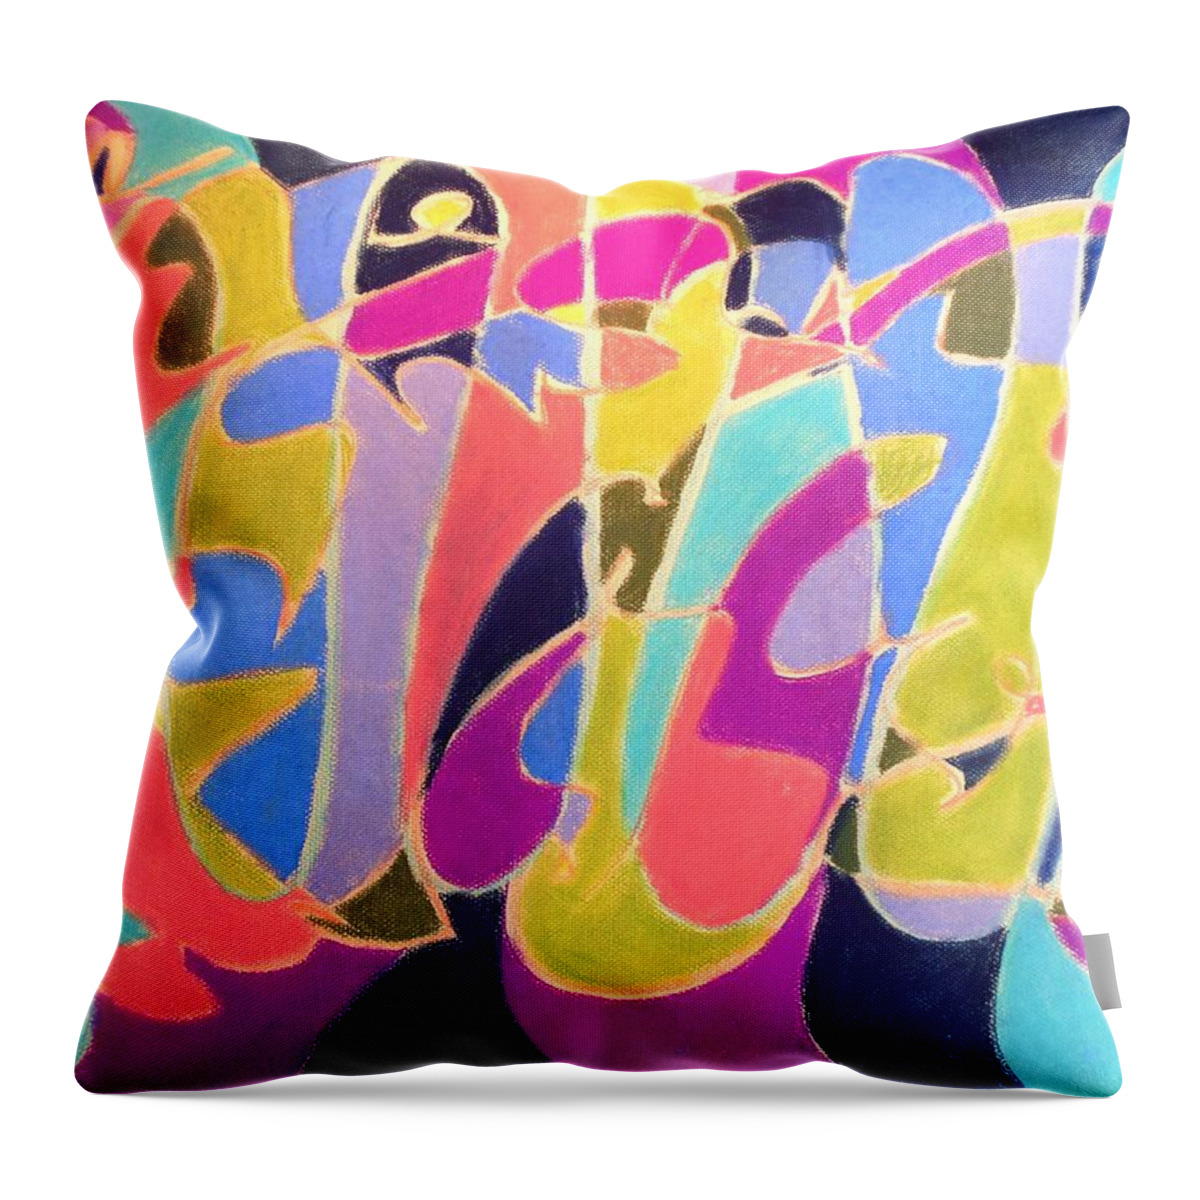 Jazz Live Throw Pillow featuring the drawing Jazz Live by Esther Newman-Cohen